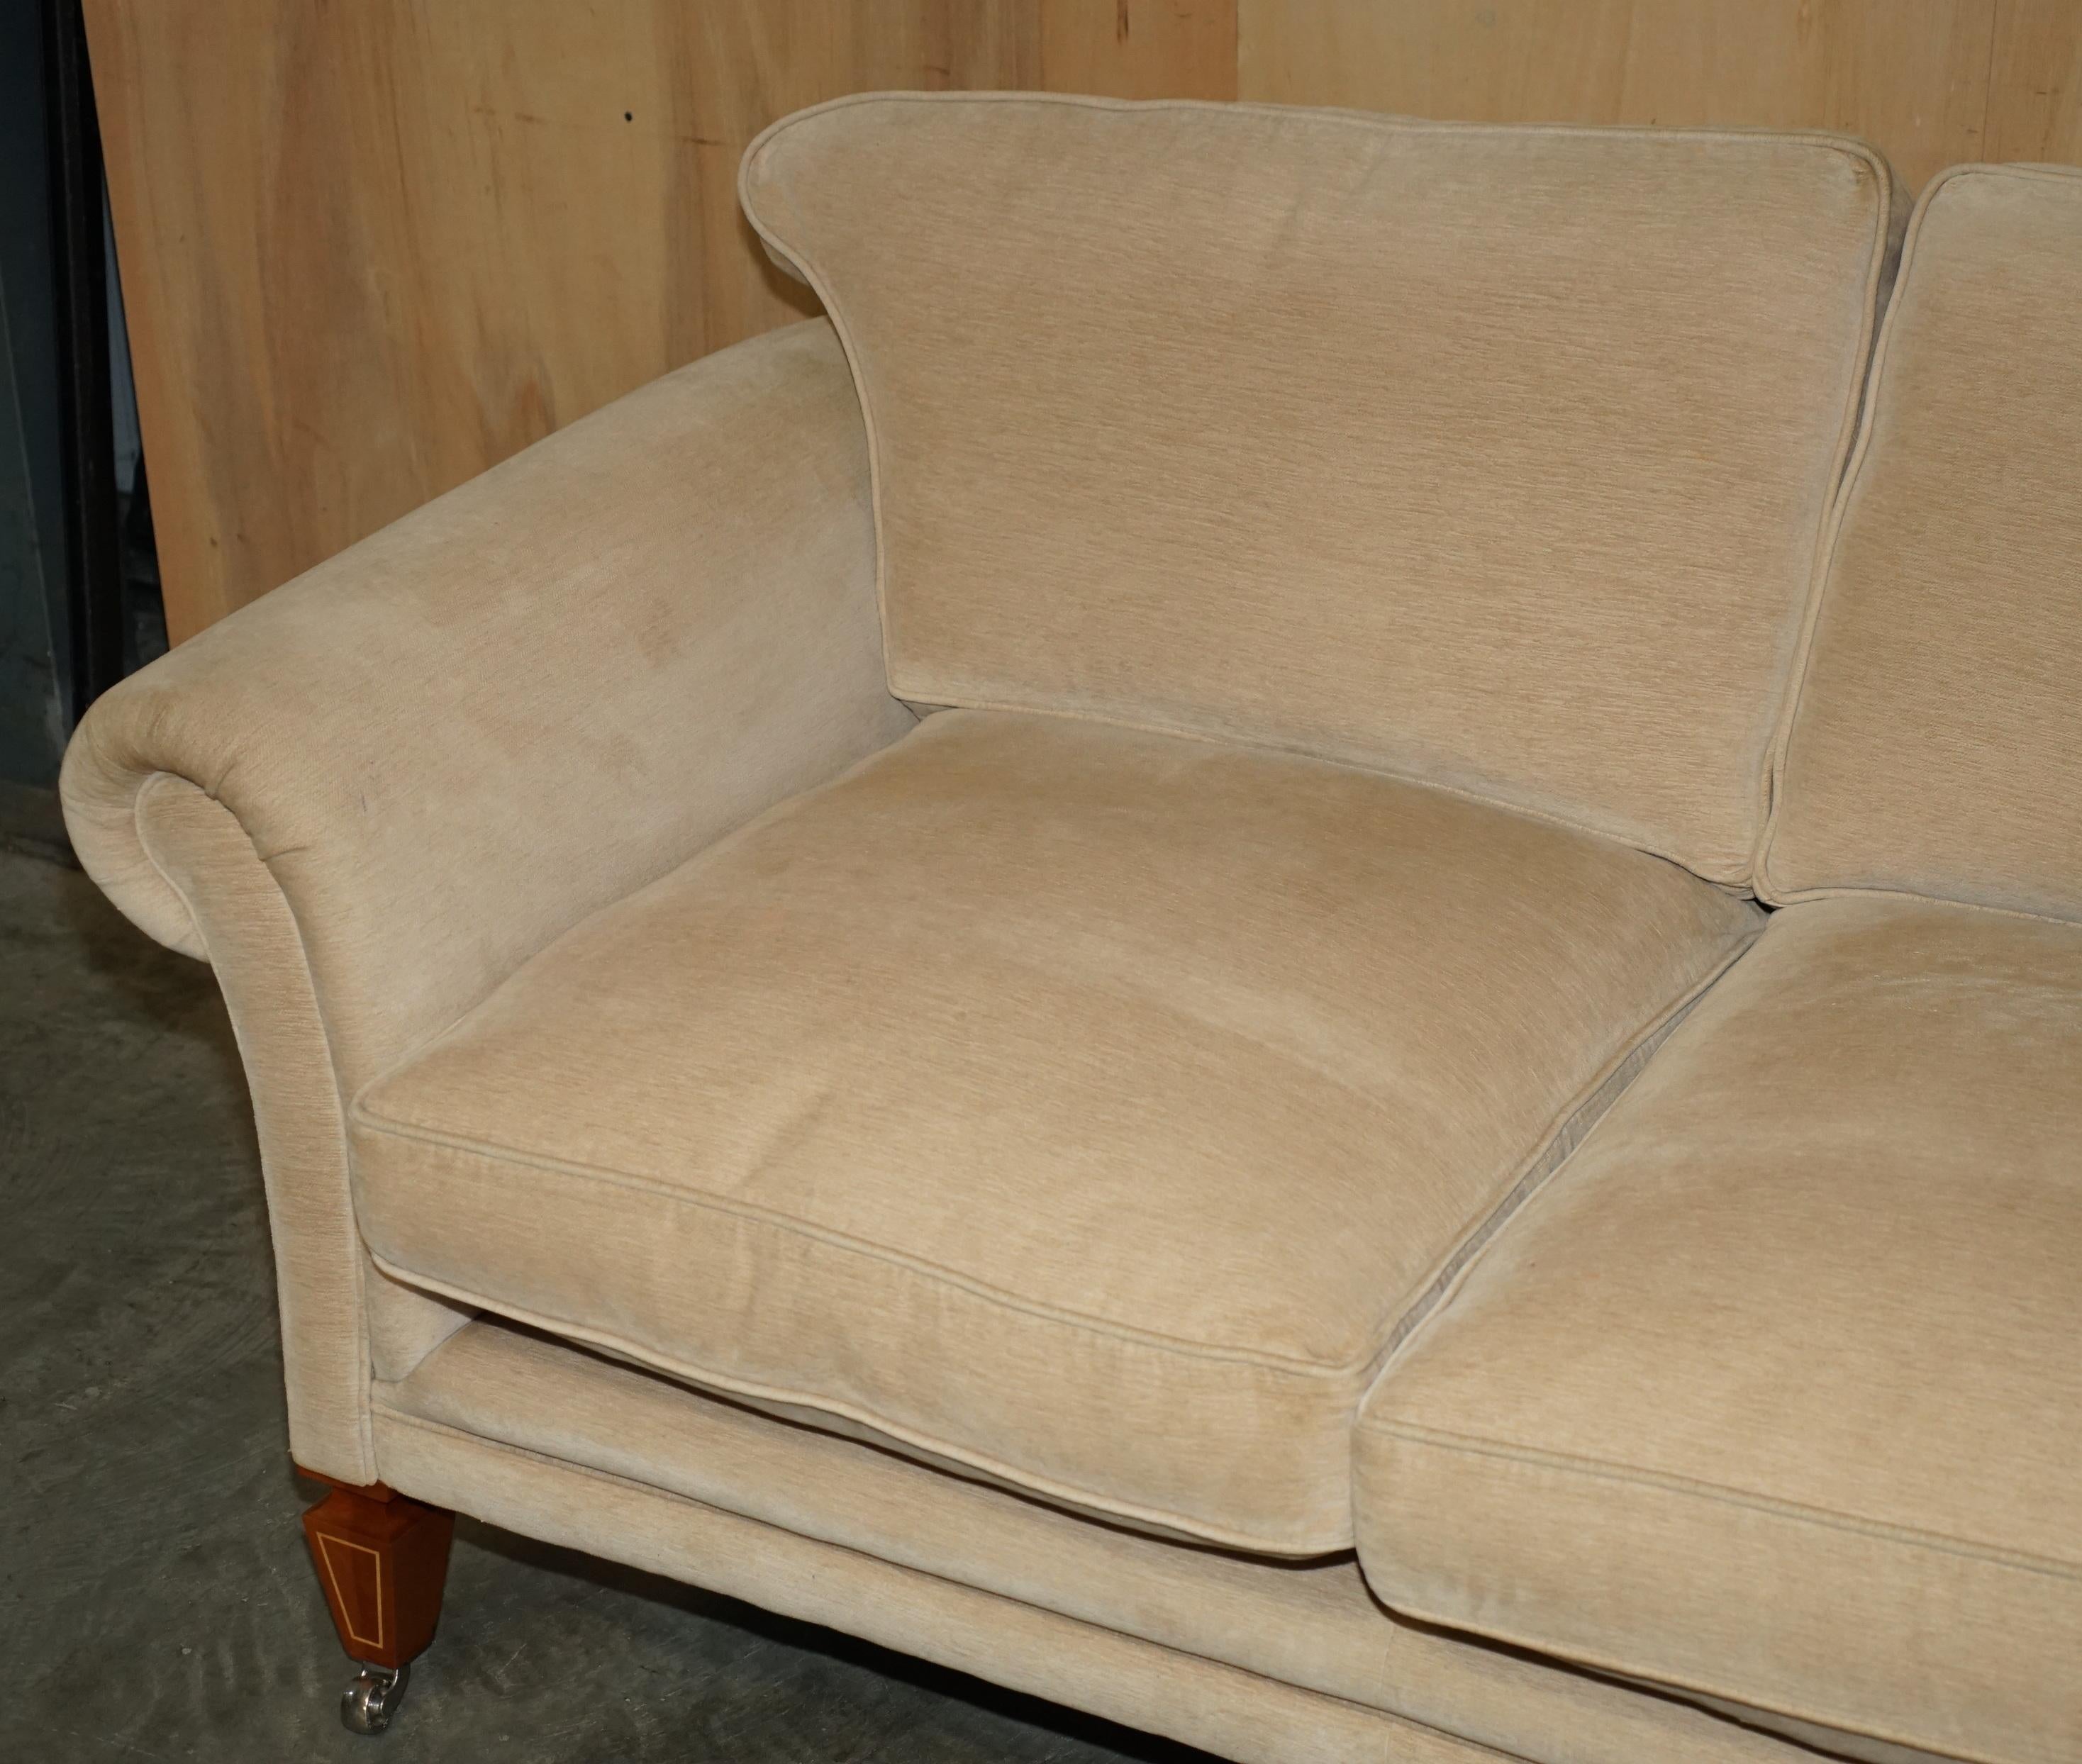 Hand-Crafted EXQUISITE VISCOUNT DAVID LINLEY TWO SEAT SOFA WiTH STAMPED CASTORS For Sale